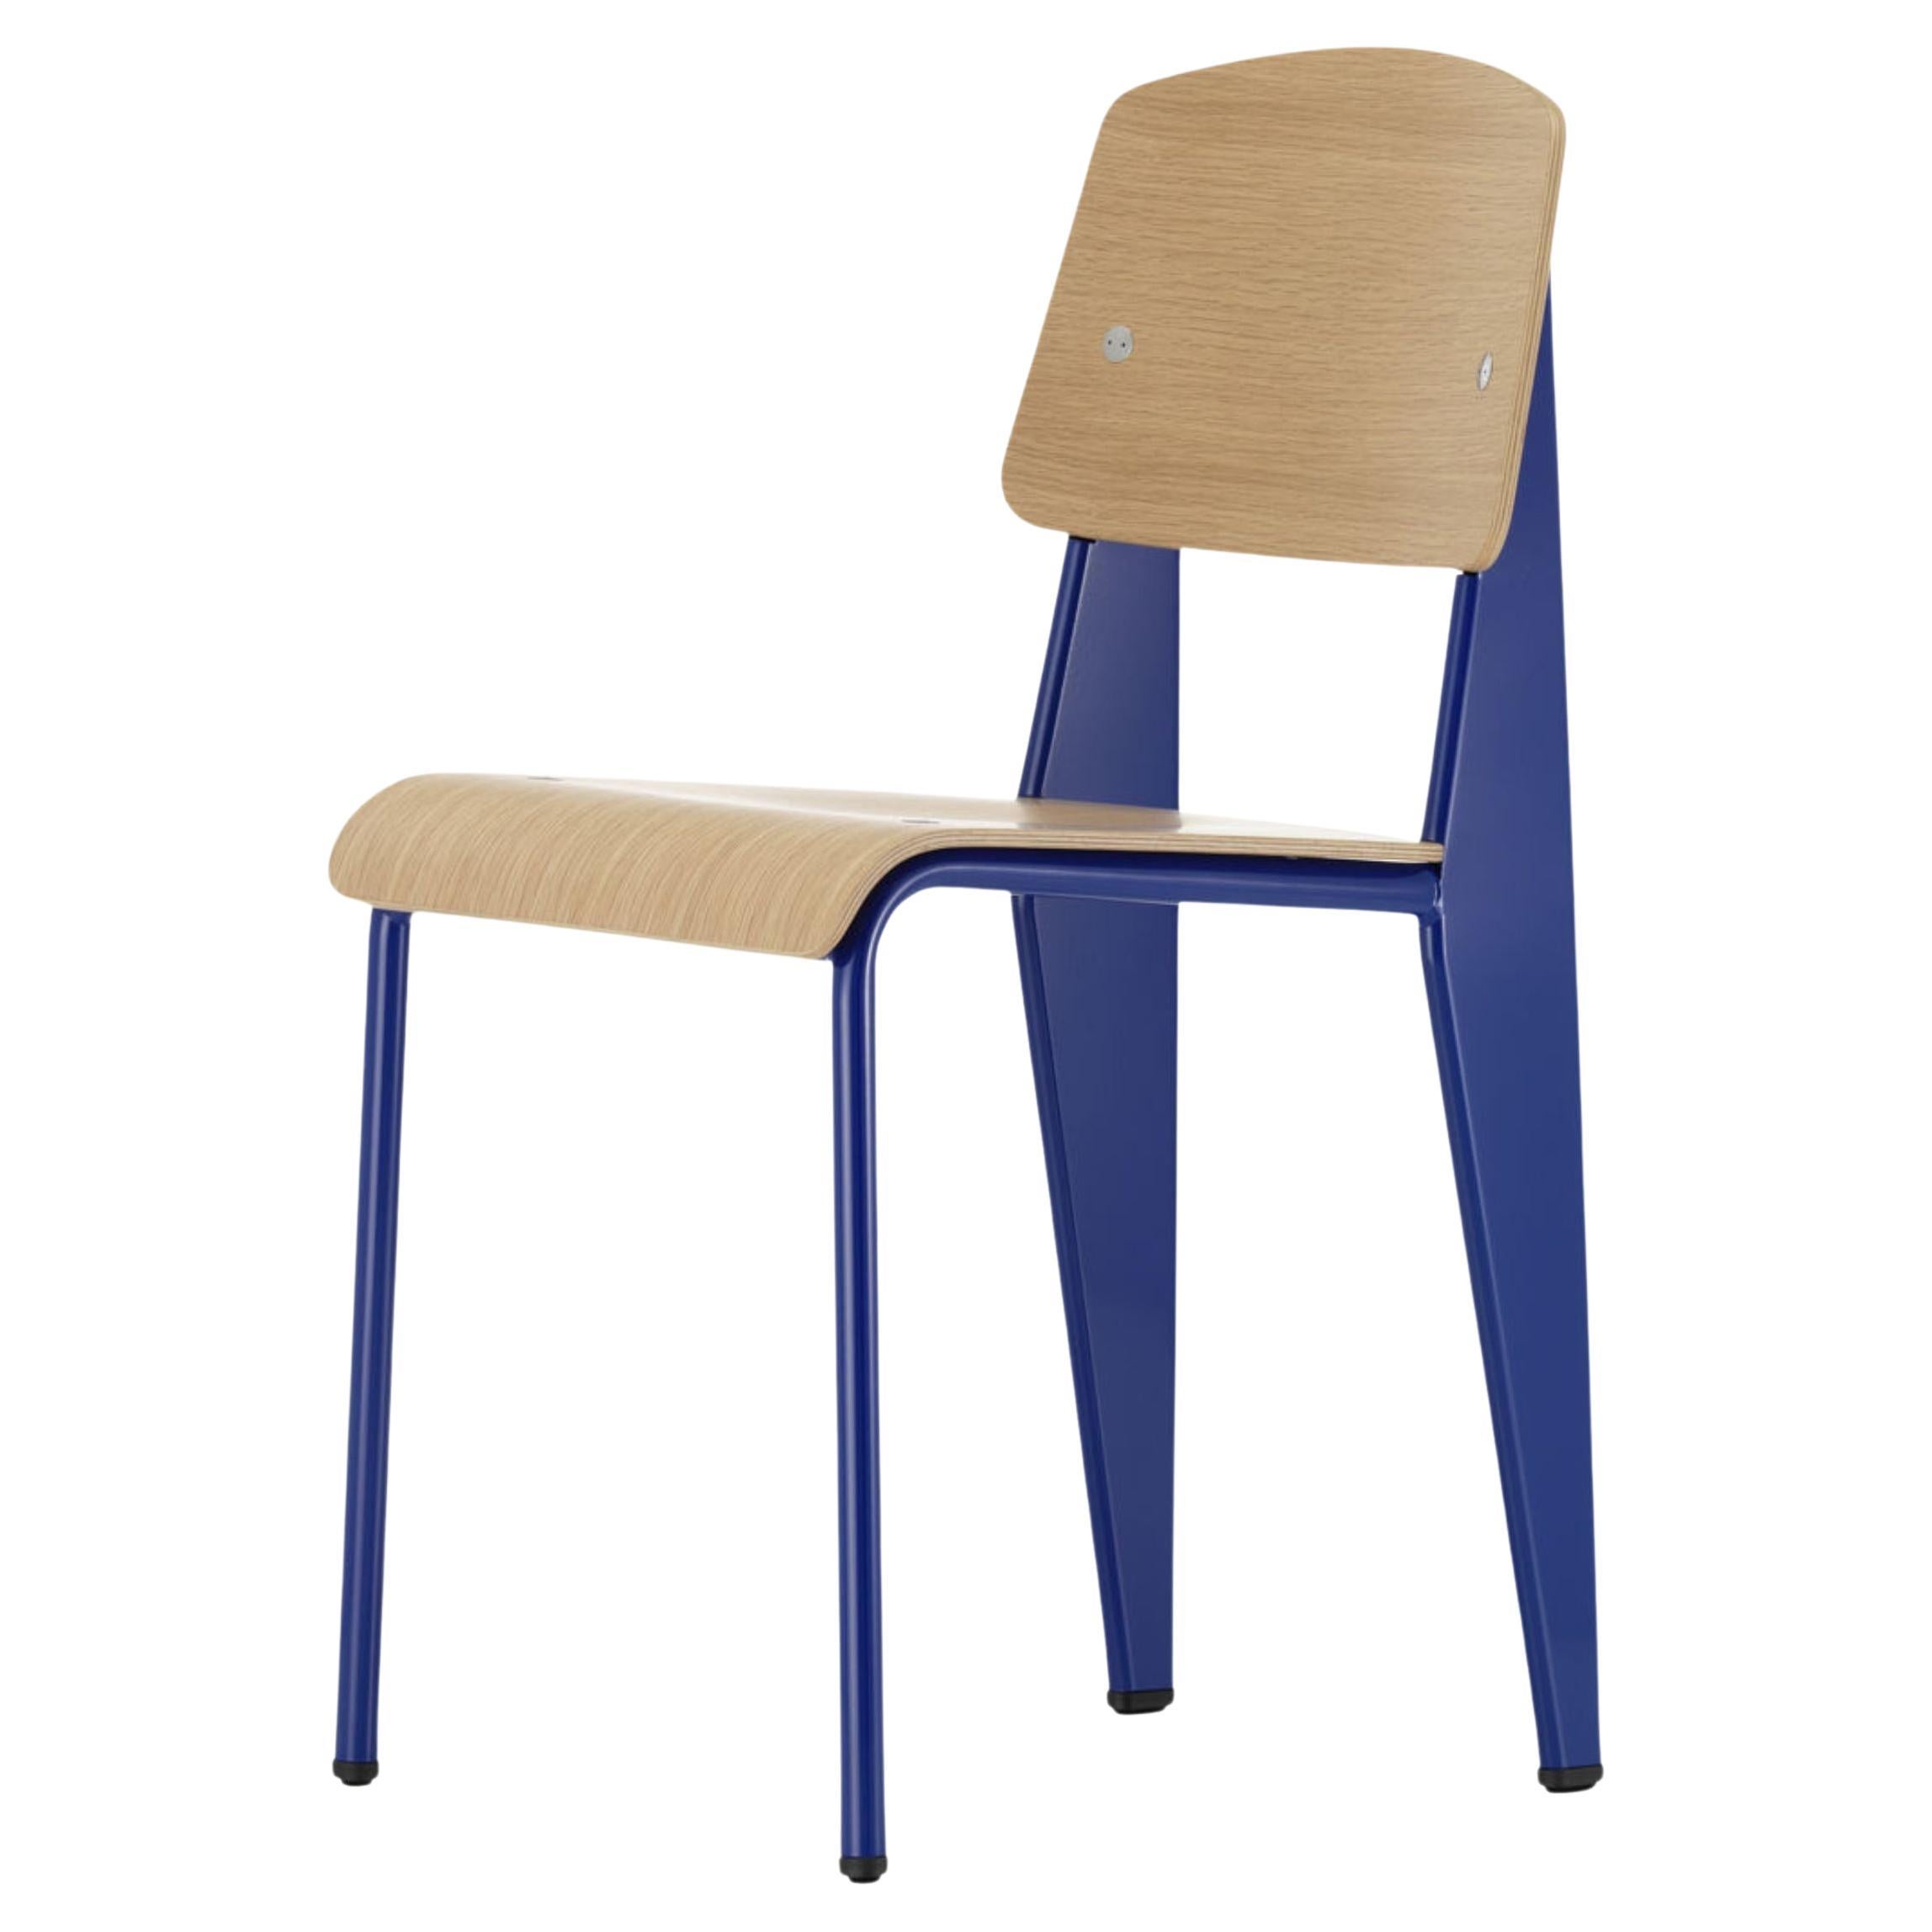 What are the dimensions of the Prouvé Standard chair?